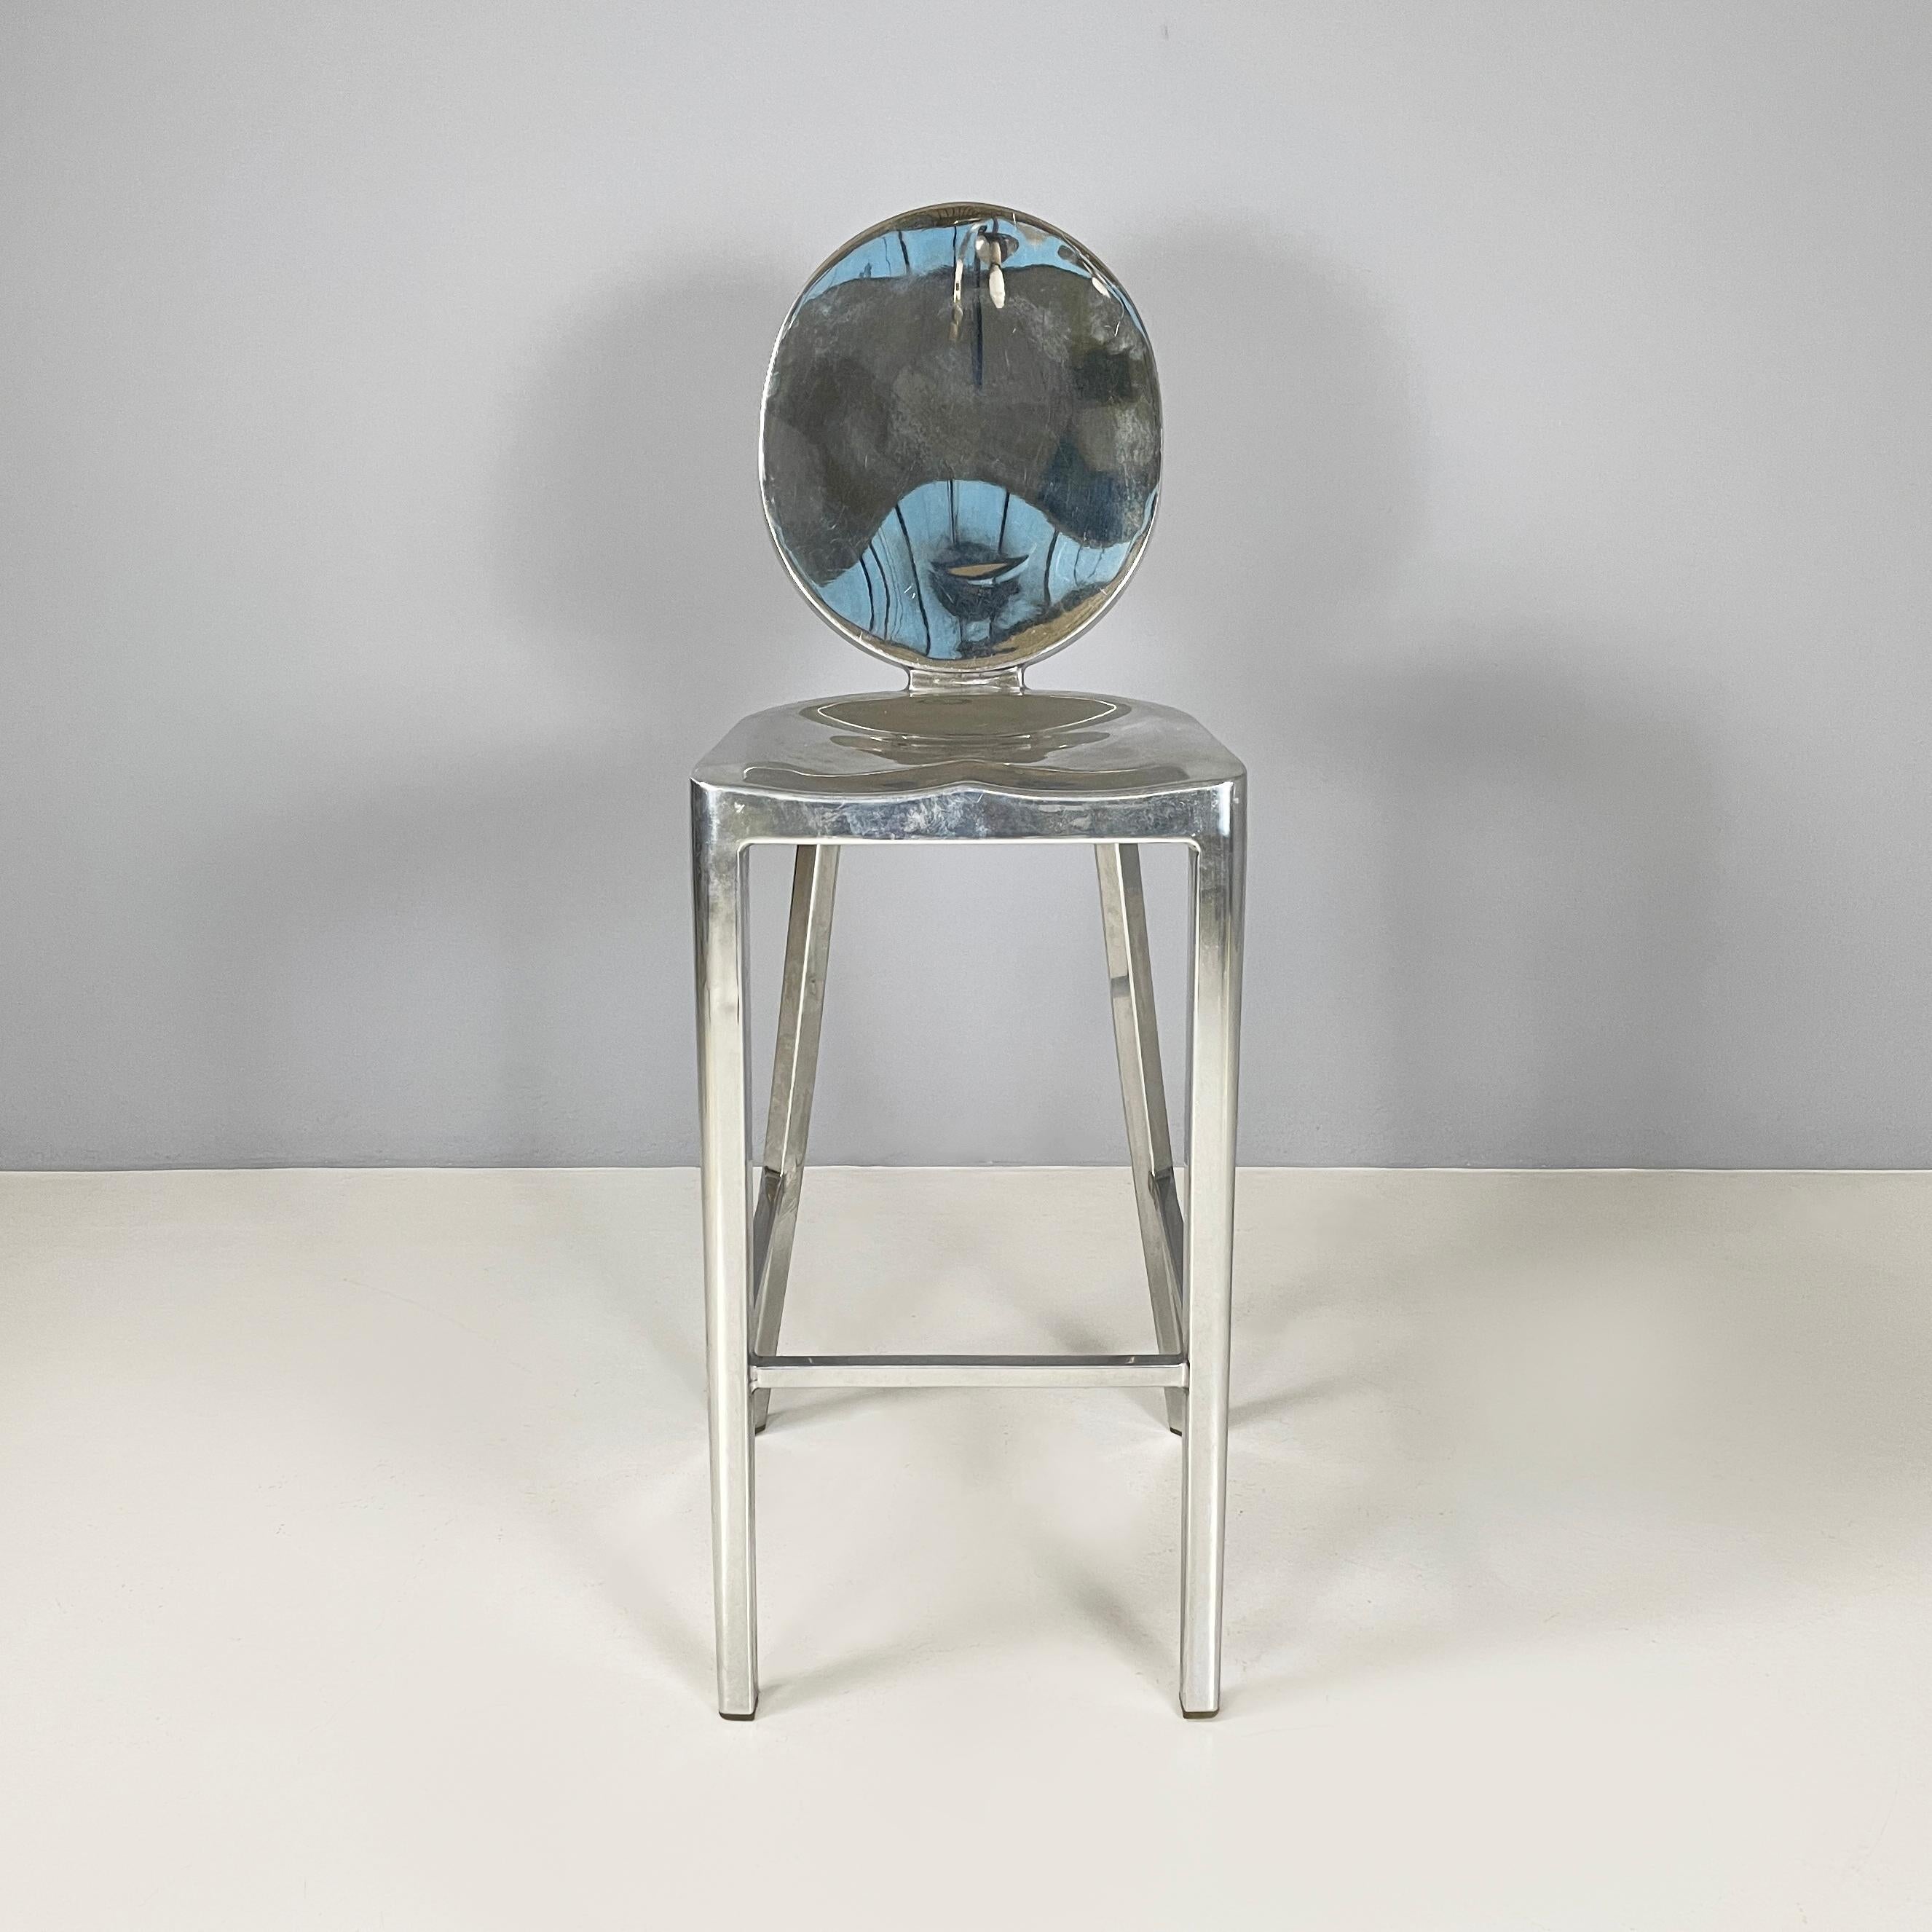 Italian modern Aluminum high bar stool Kong by Philippe Starck for Emeco, 2000s
High bar stool mod. Kong entirely polished aluminum. The backrest is oval while the seat is rounded. The legs have a square section with a footrest, also in metal with a